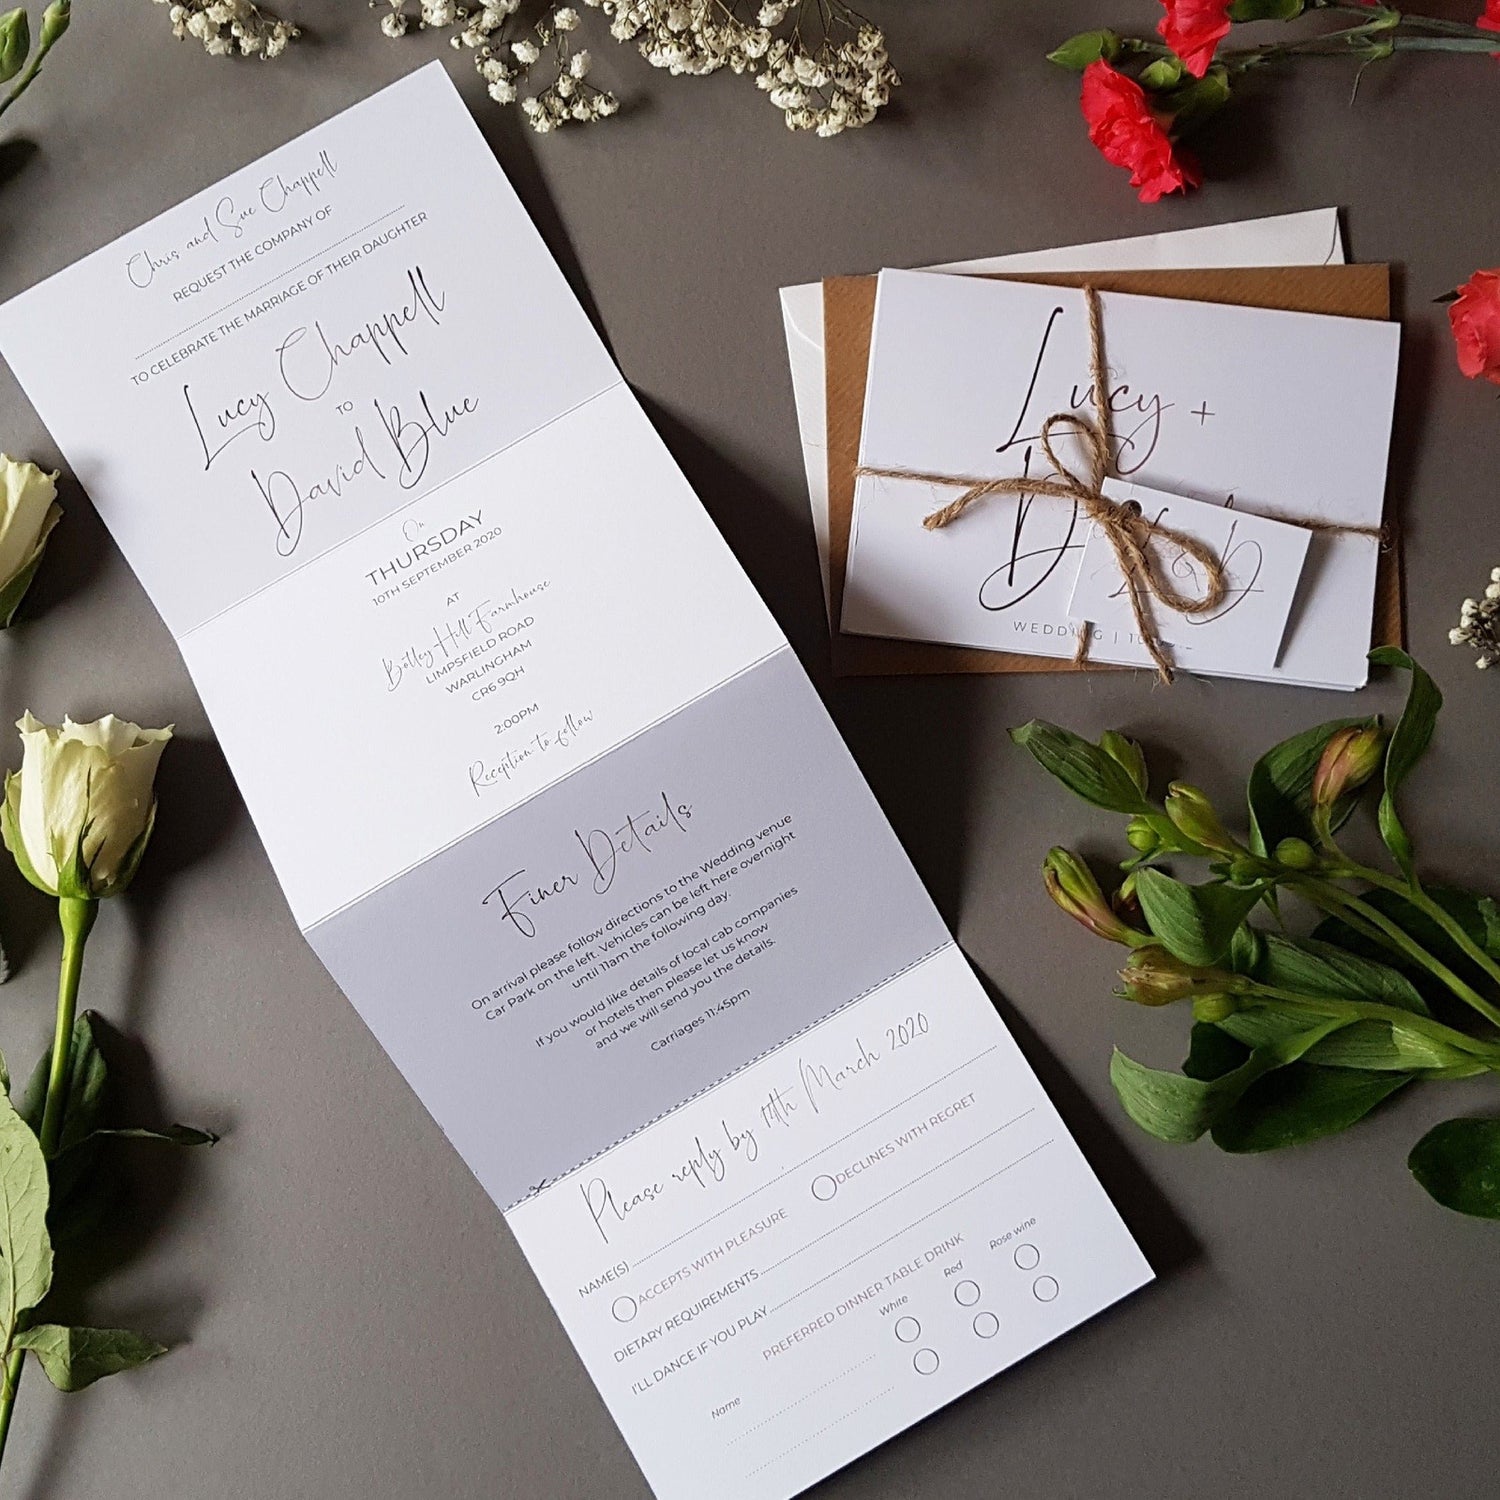 Script Wedding Invitations With Tags & Twine Sample